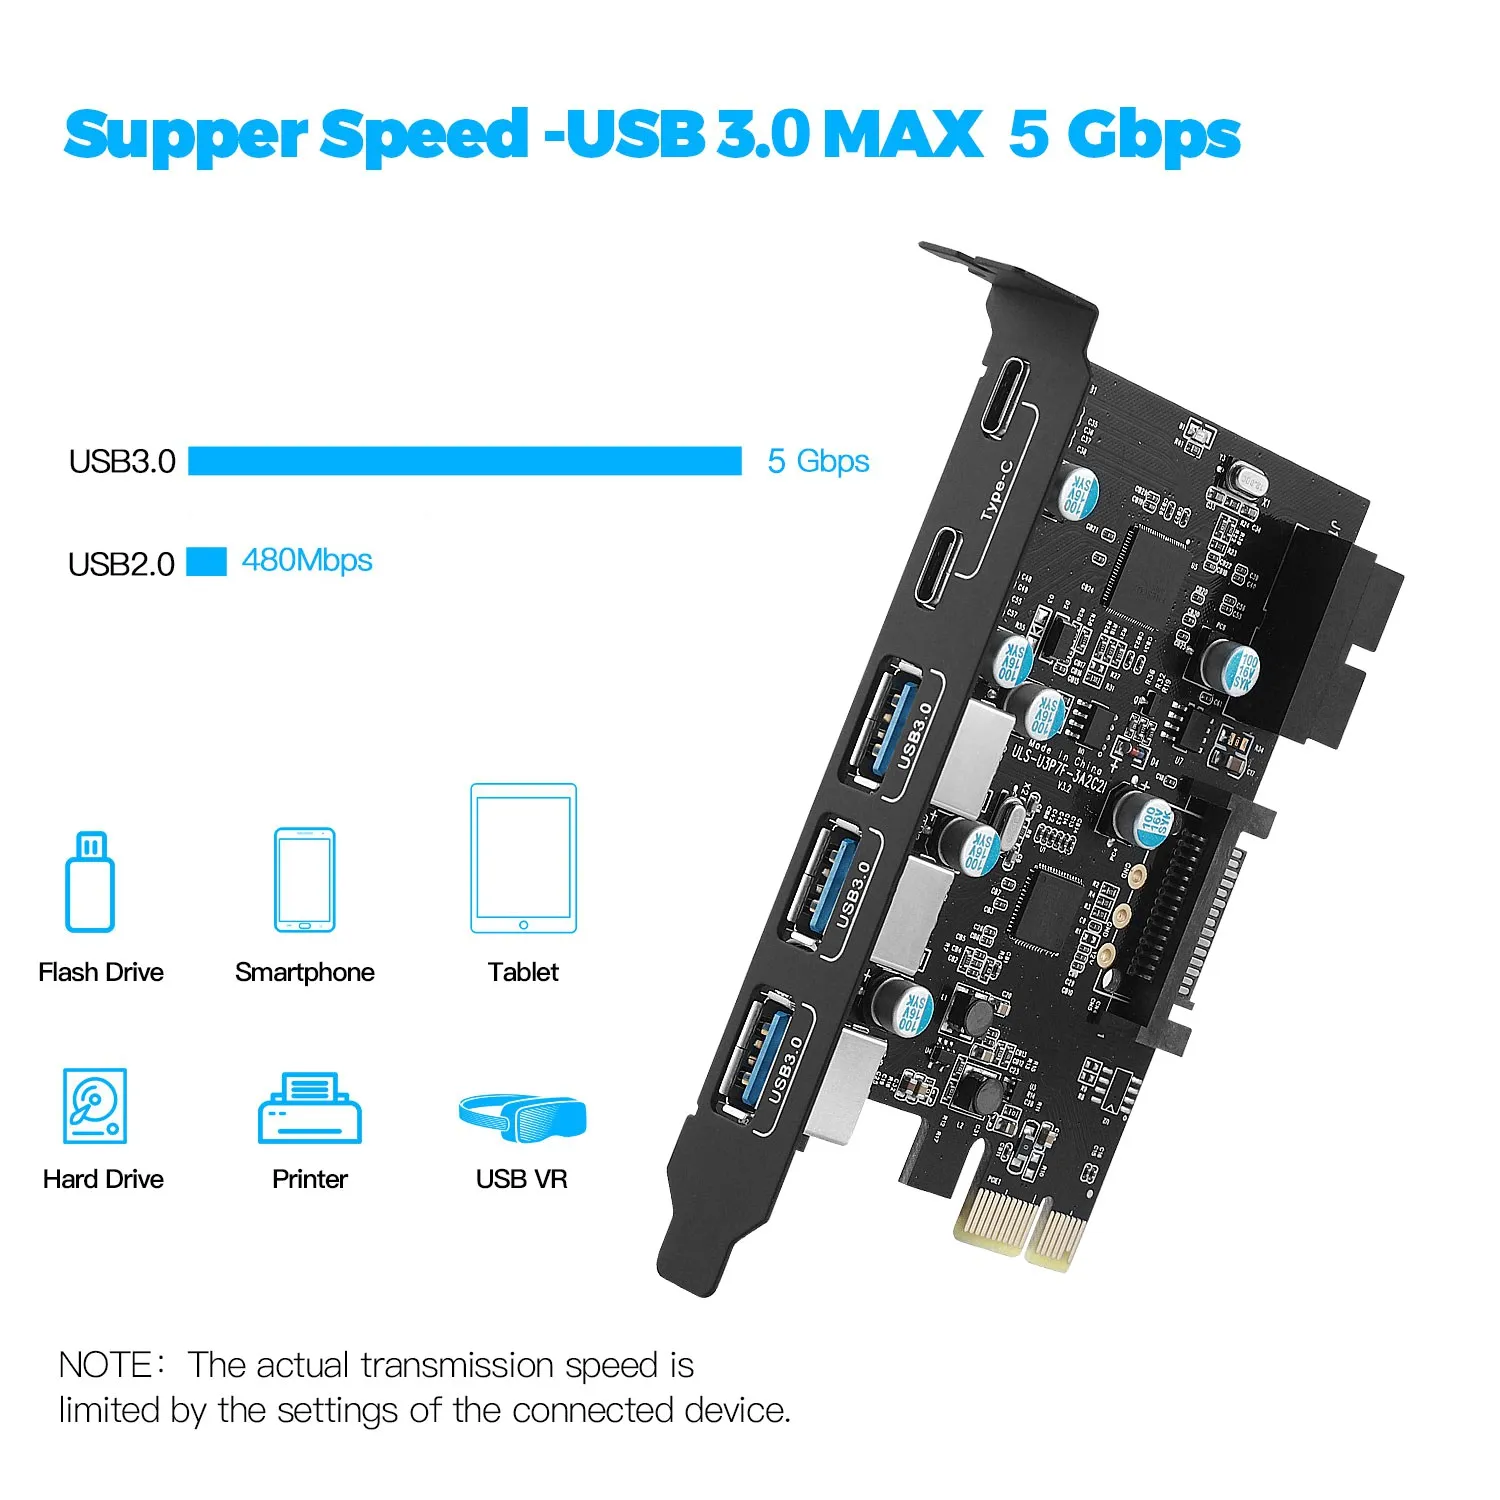 

PCI-E x 1 to USB Expansion Card, USB 3.0 5Gpbs PCI Express Card, PCIE Motherboard Card for PC Desktop, Windows Mac Linux